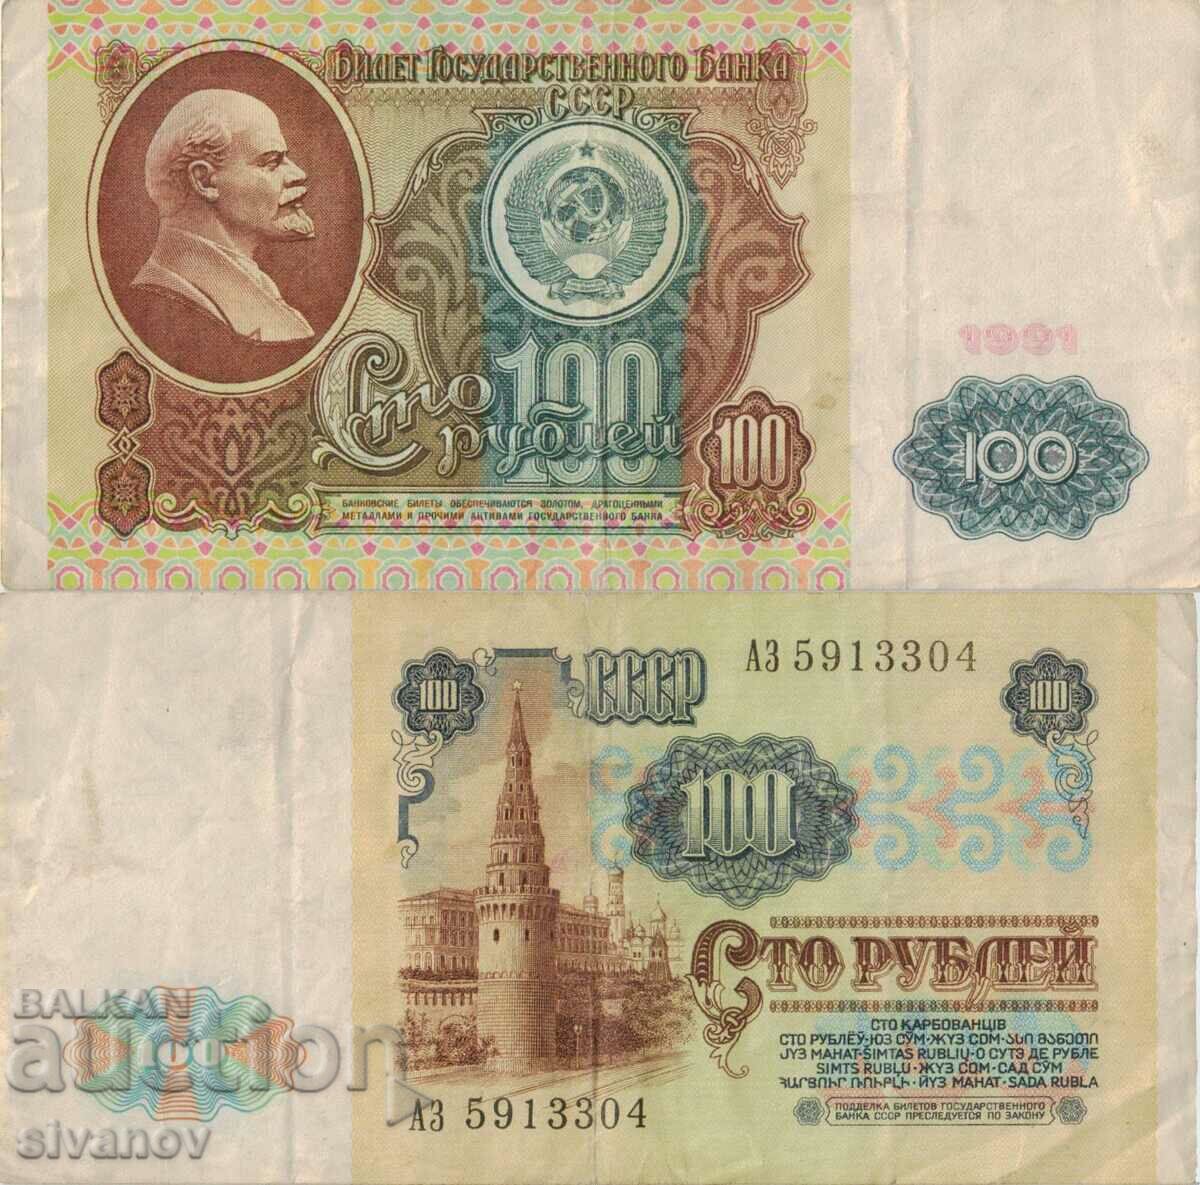 Soviet Union Russia USSR 10 rubles 1991 banknote #5352